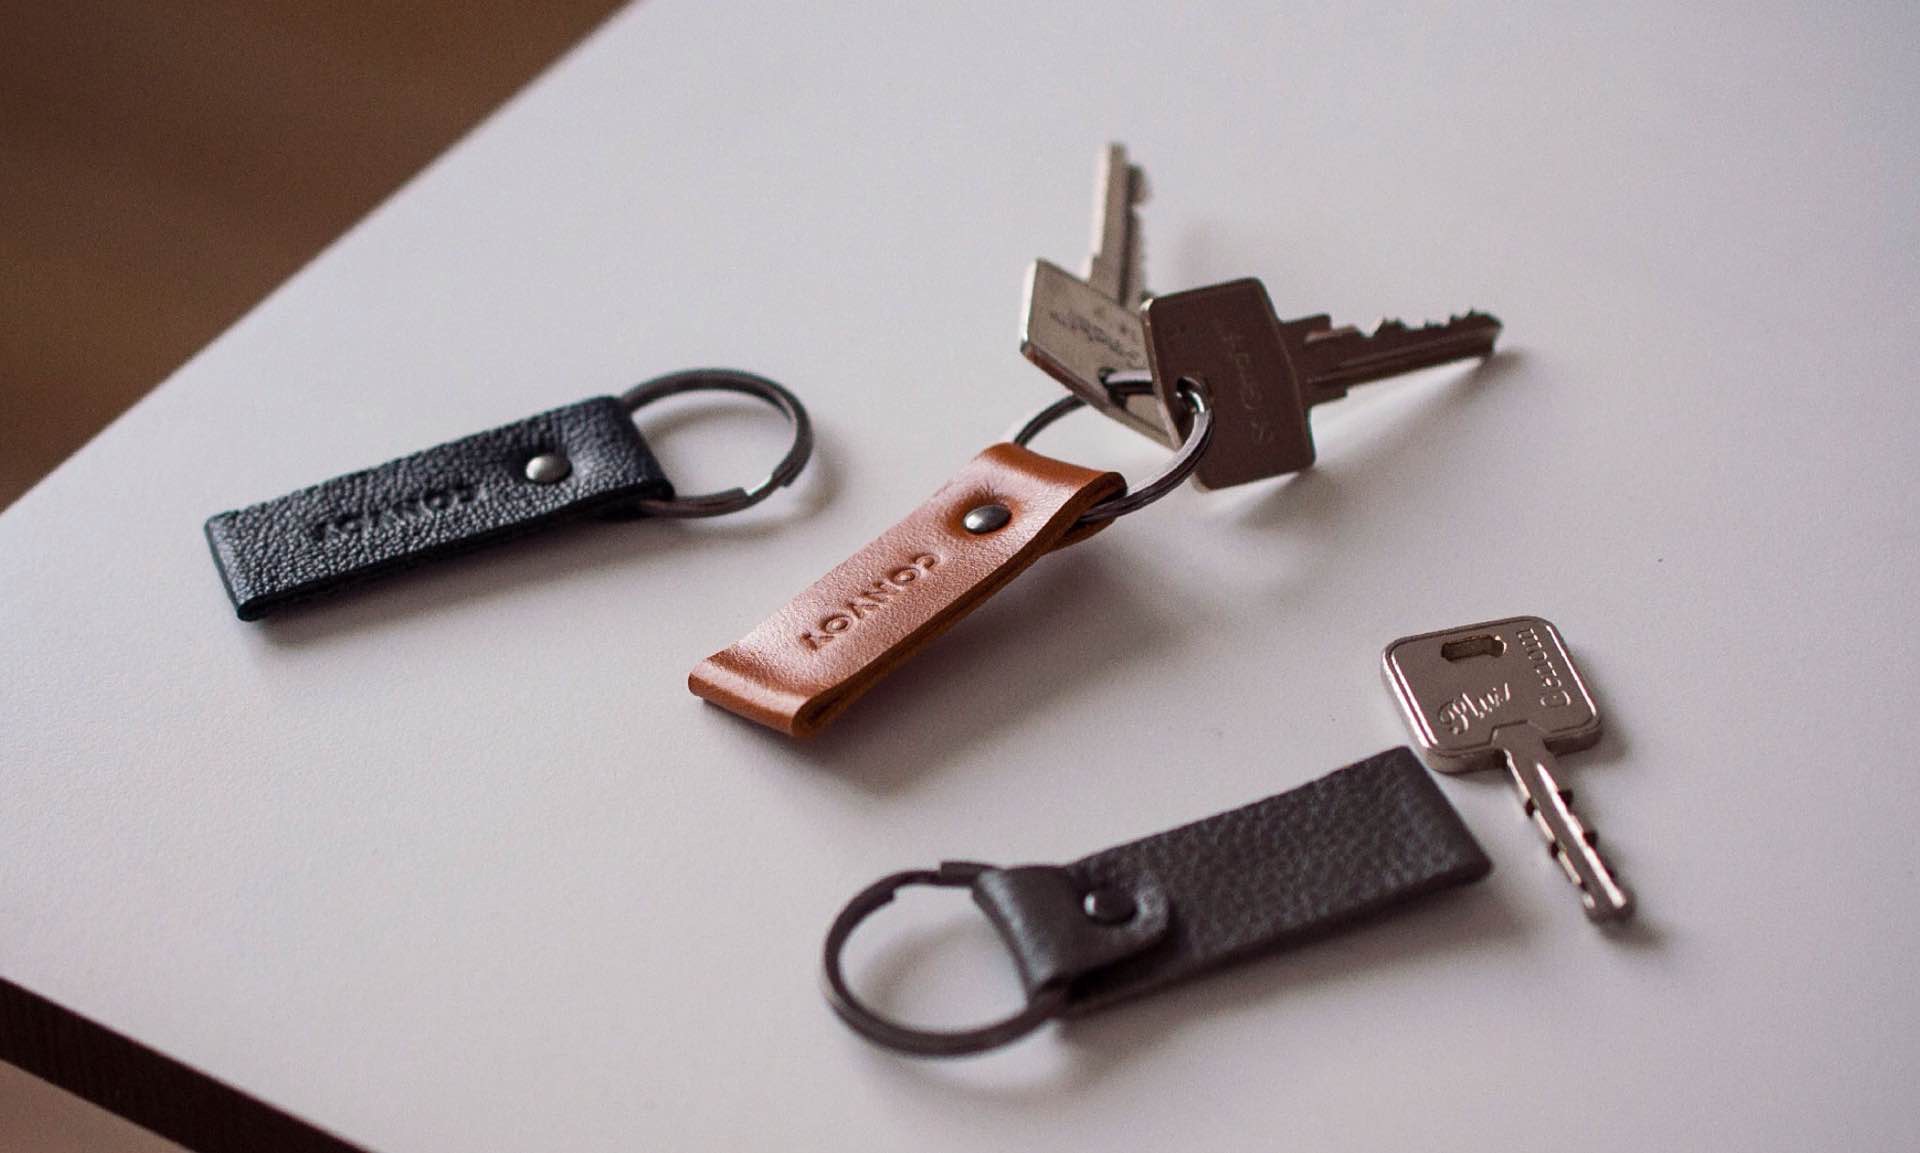 Convoy Co. leather key fob. ($8)